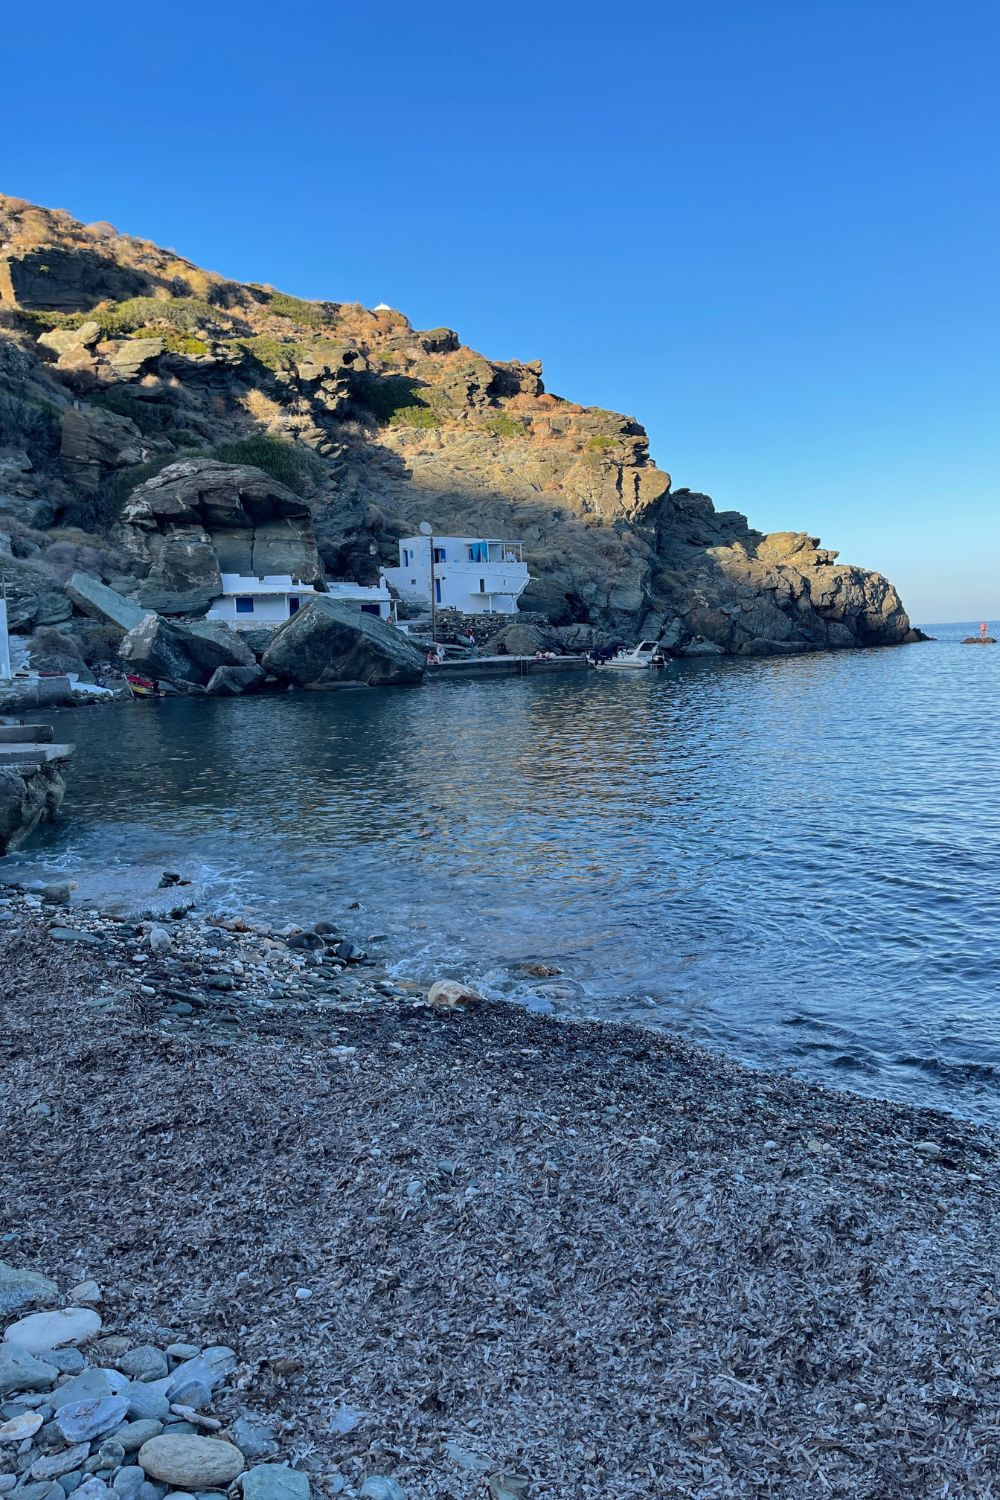 Secluded Kastro Beach in Sifnos framed by rugged cliffs and a white-washed building, reflecting the tranquility of the Aegean Sea